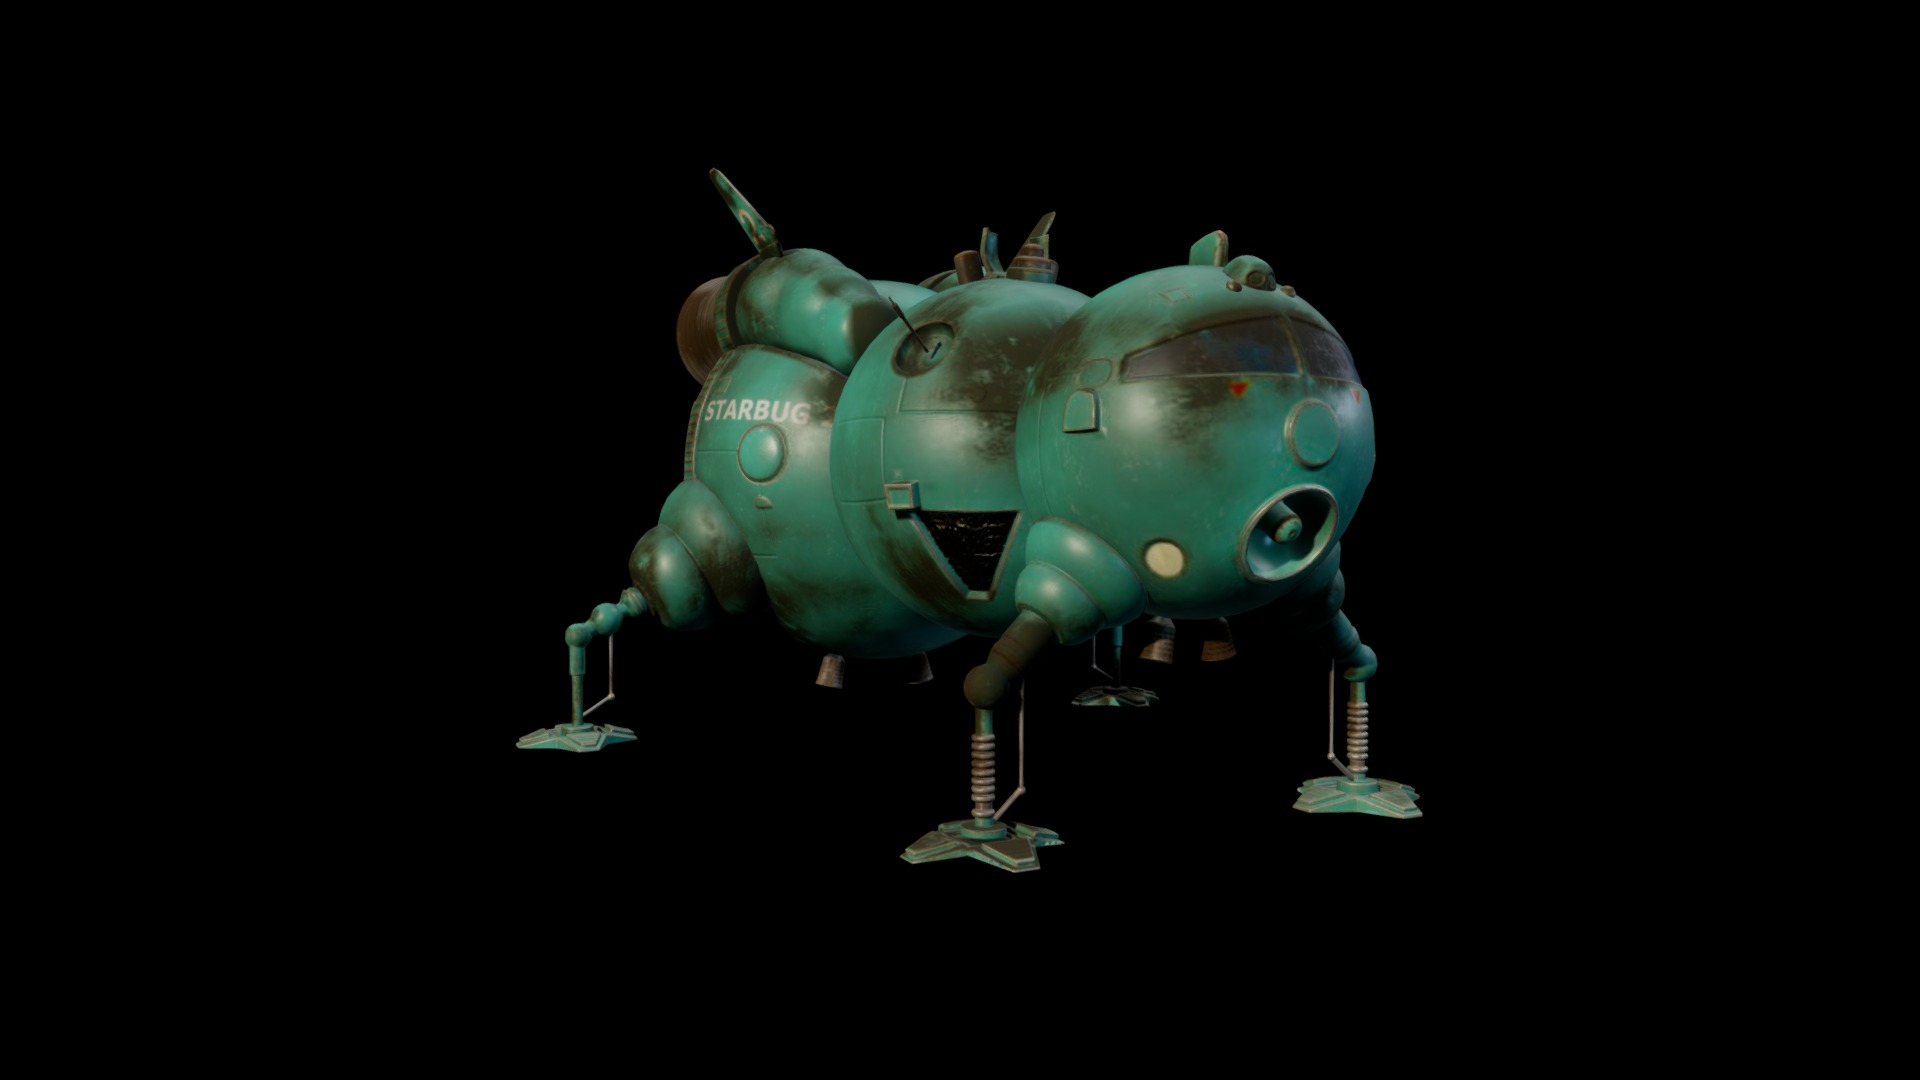 3D model Starbug (Red Dwarf) - This is a 3D model of the Starbug (Red Dwarf). The 3D model is about a green robot with a black background.